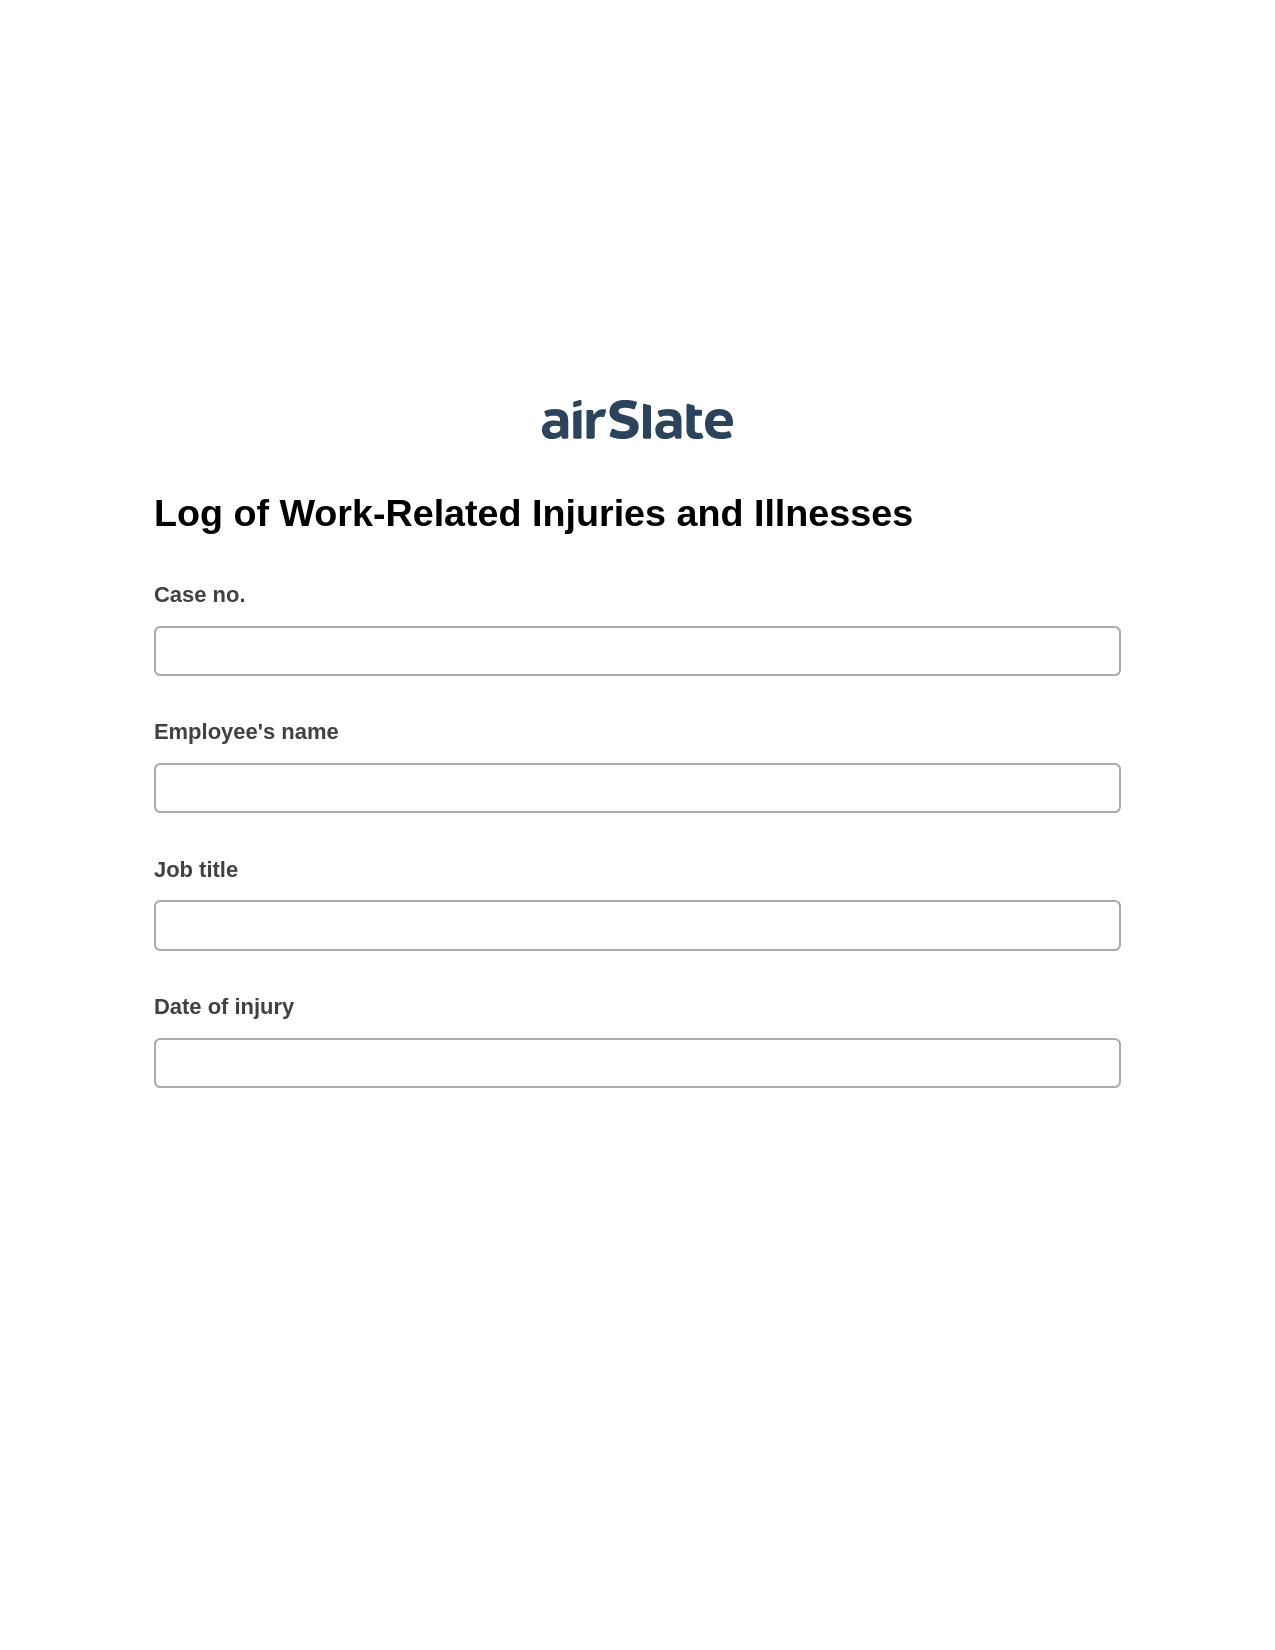 Log of Work-Related Injuries and Illnesses Pre-fill from Excel Spreadsheet Bot, Lock the slate bot, Export to Formstack Documents Bot